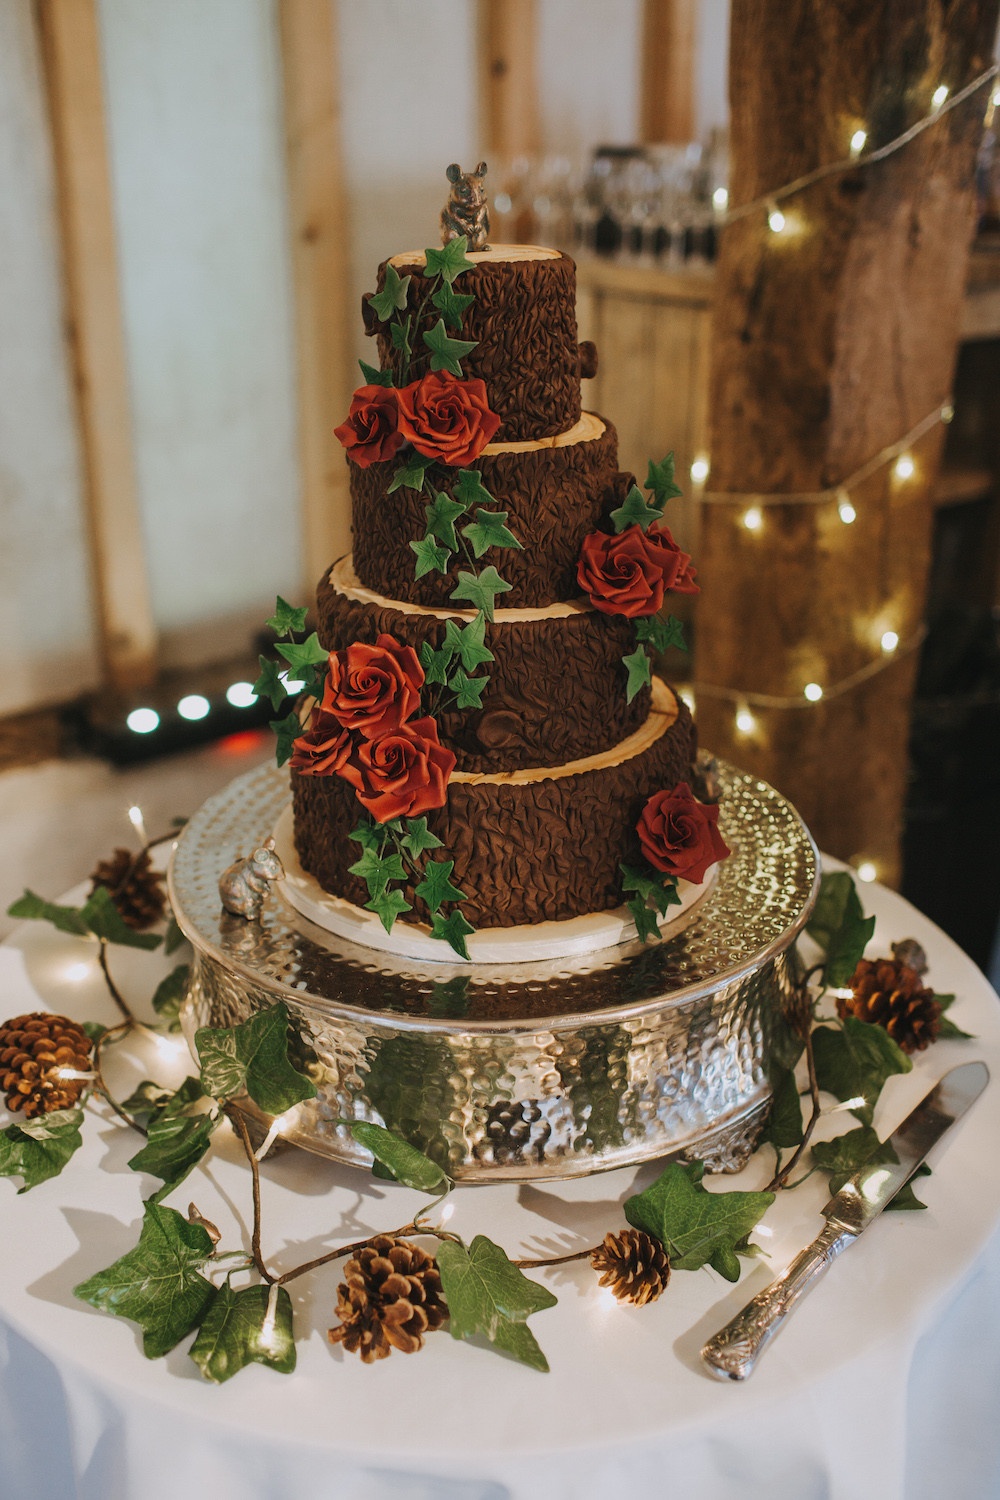 Lord Of The Rings Wedding Cake
 Fantasy Wedding At Southend Barns Inspired By Lord The